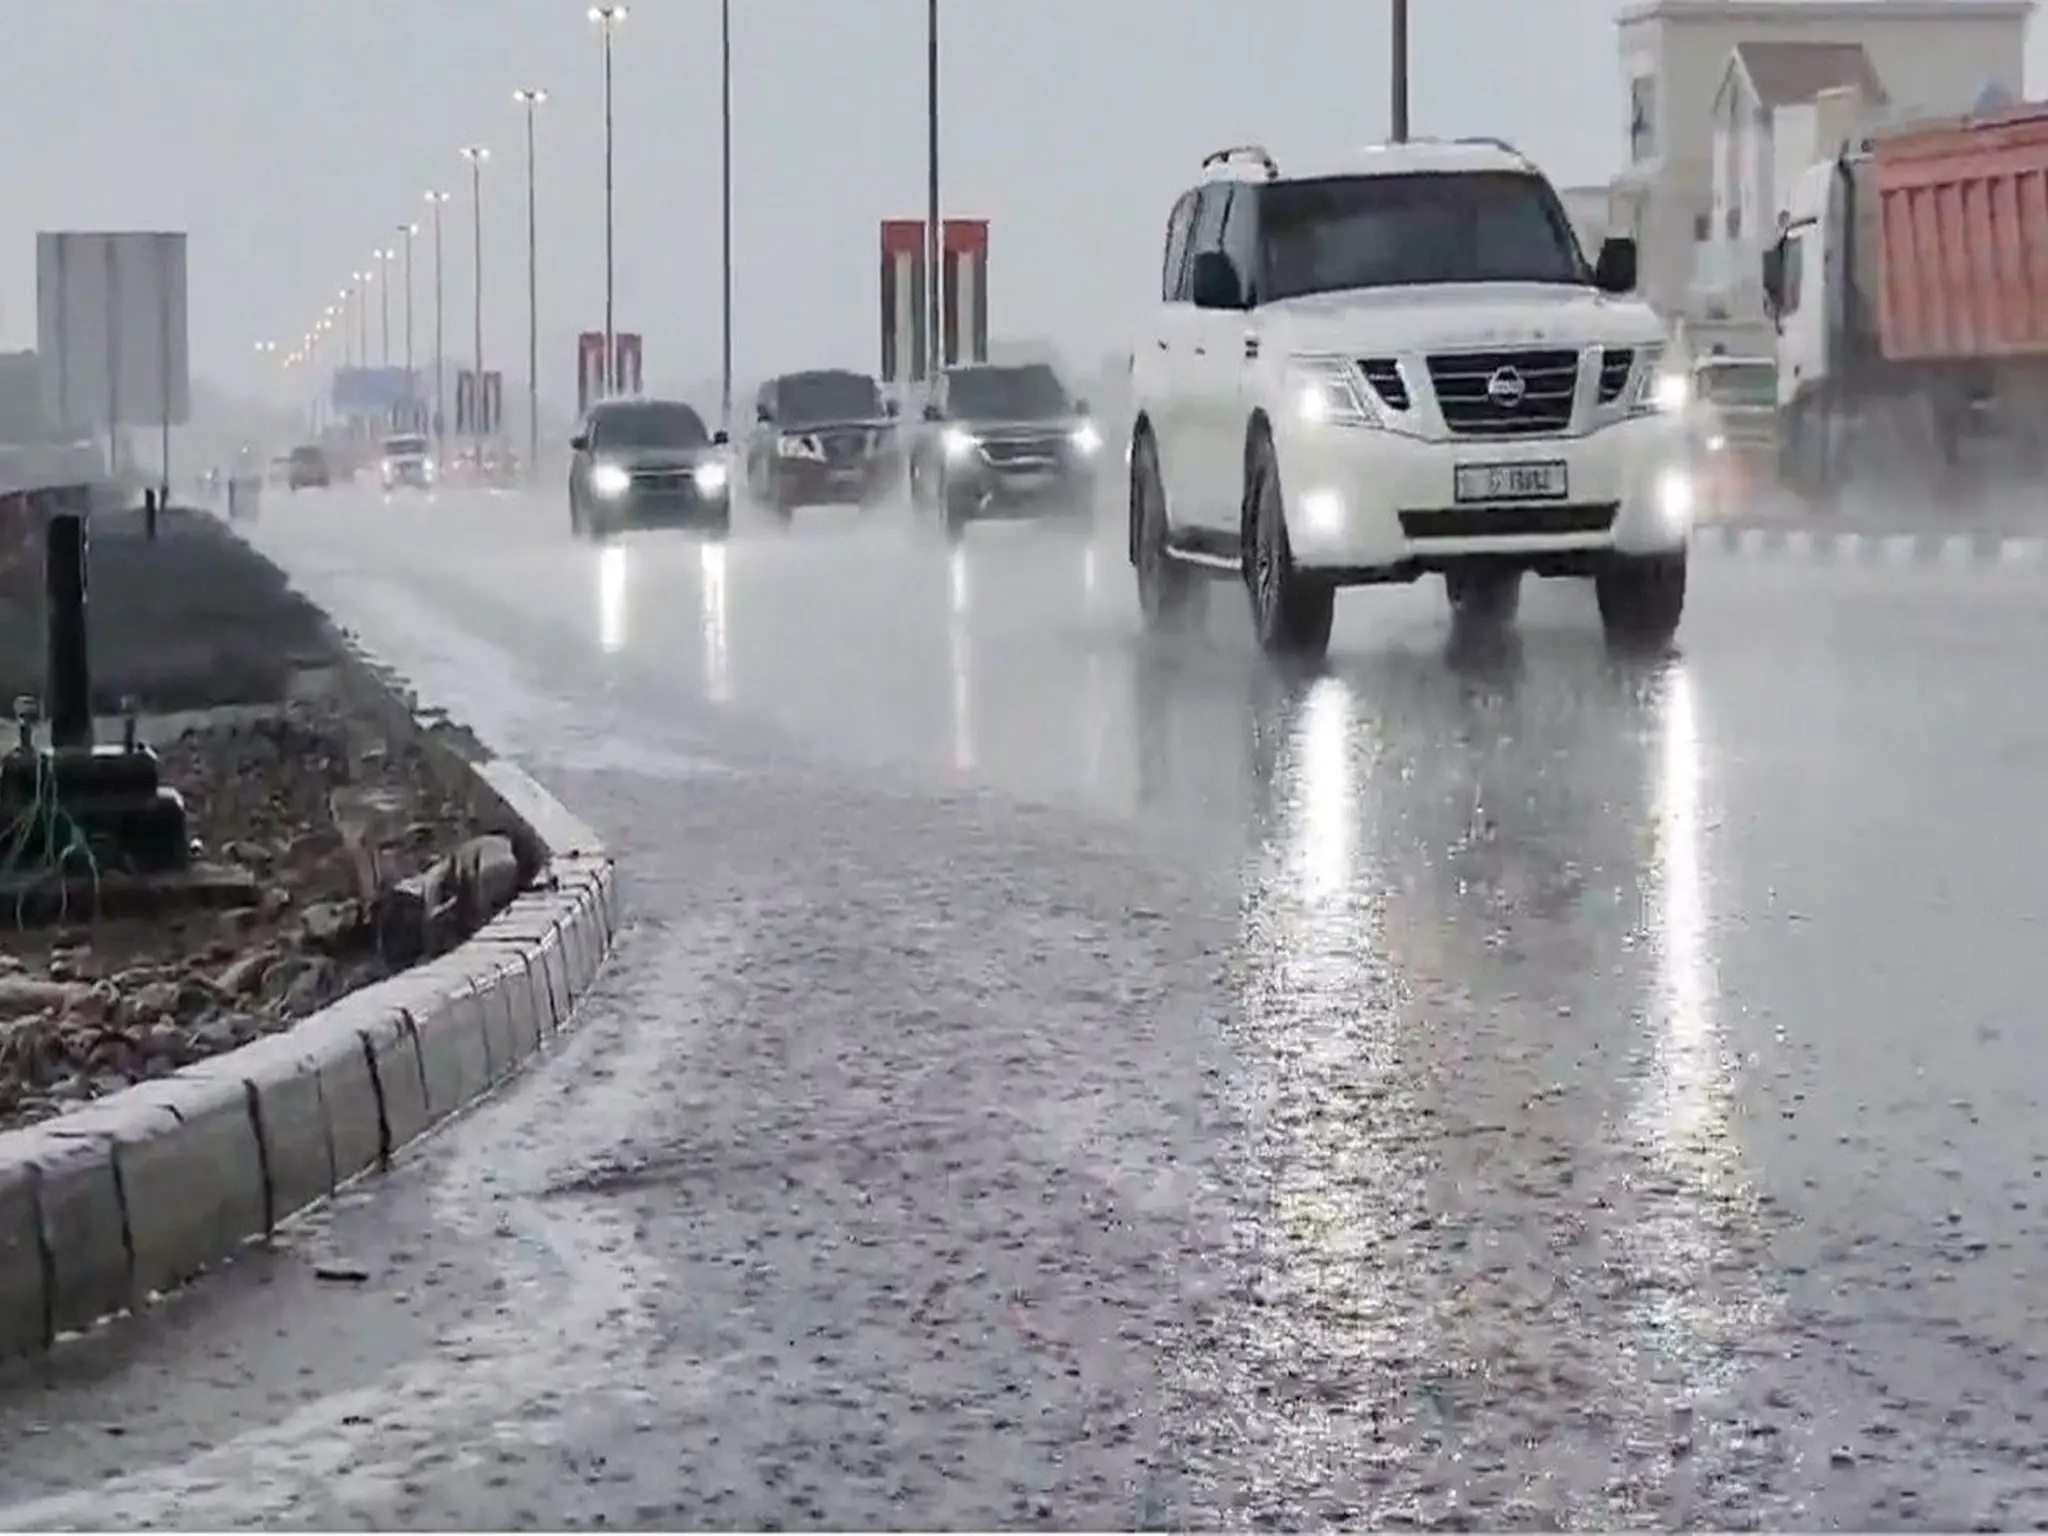 UAE Meteorology announces that the country has entered the coldest phase